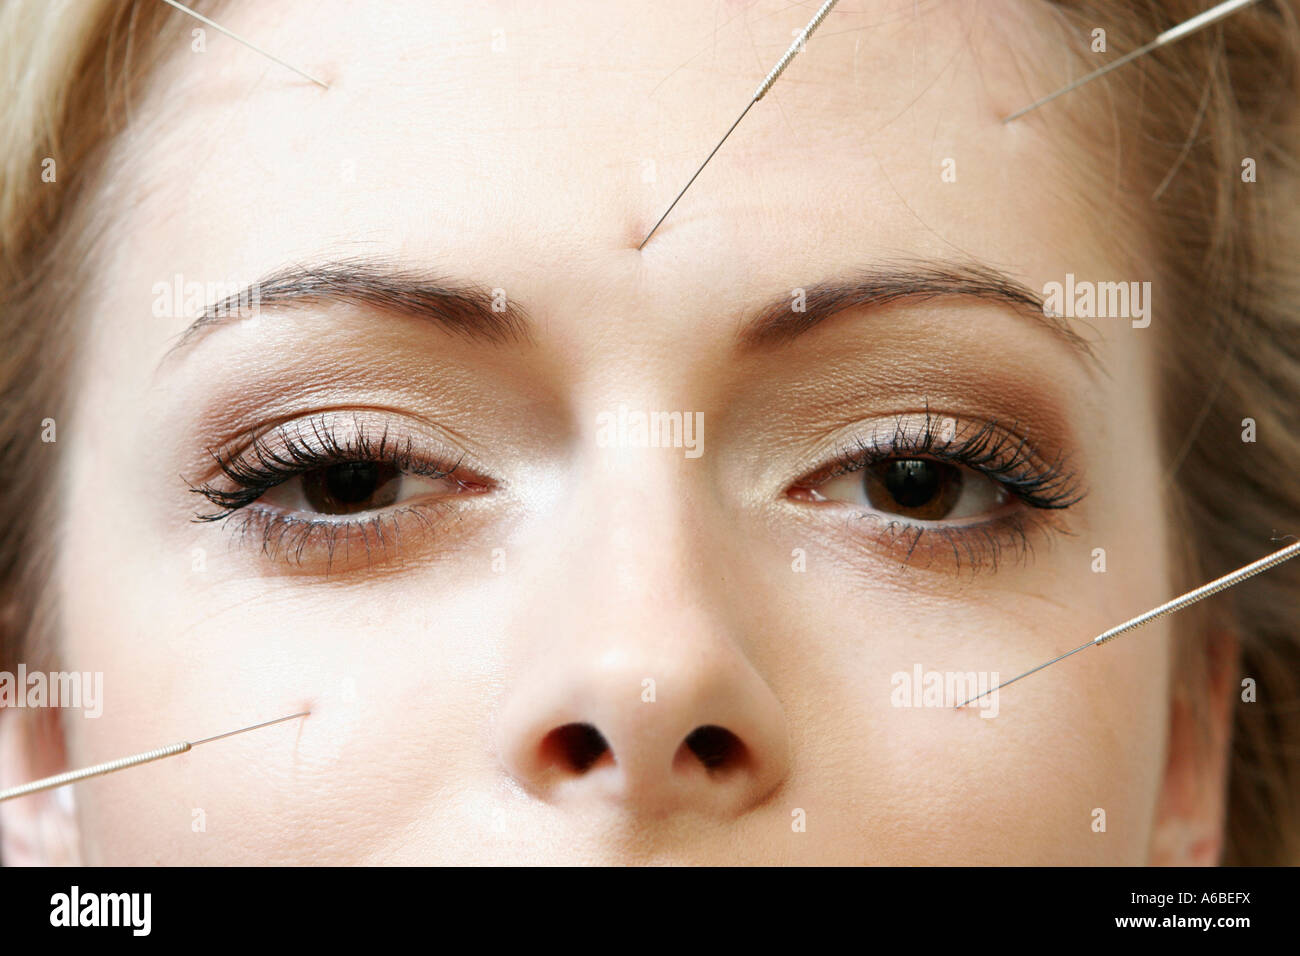 Women receiving acupuncture treatment Stock Photo